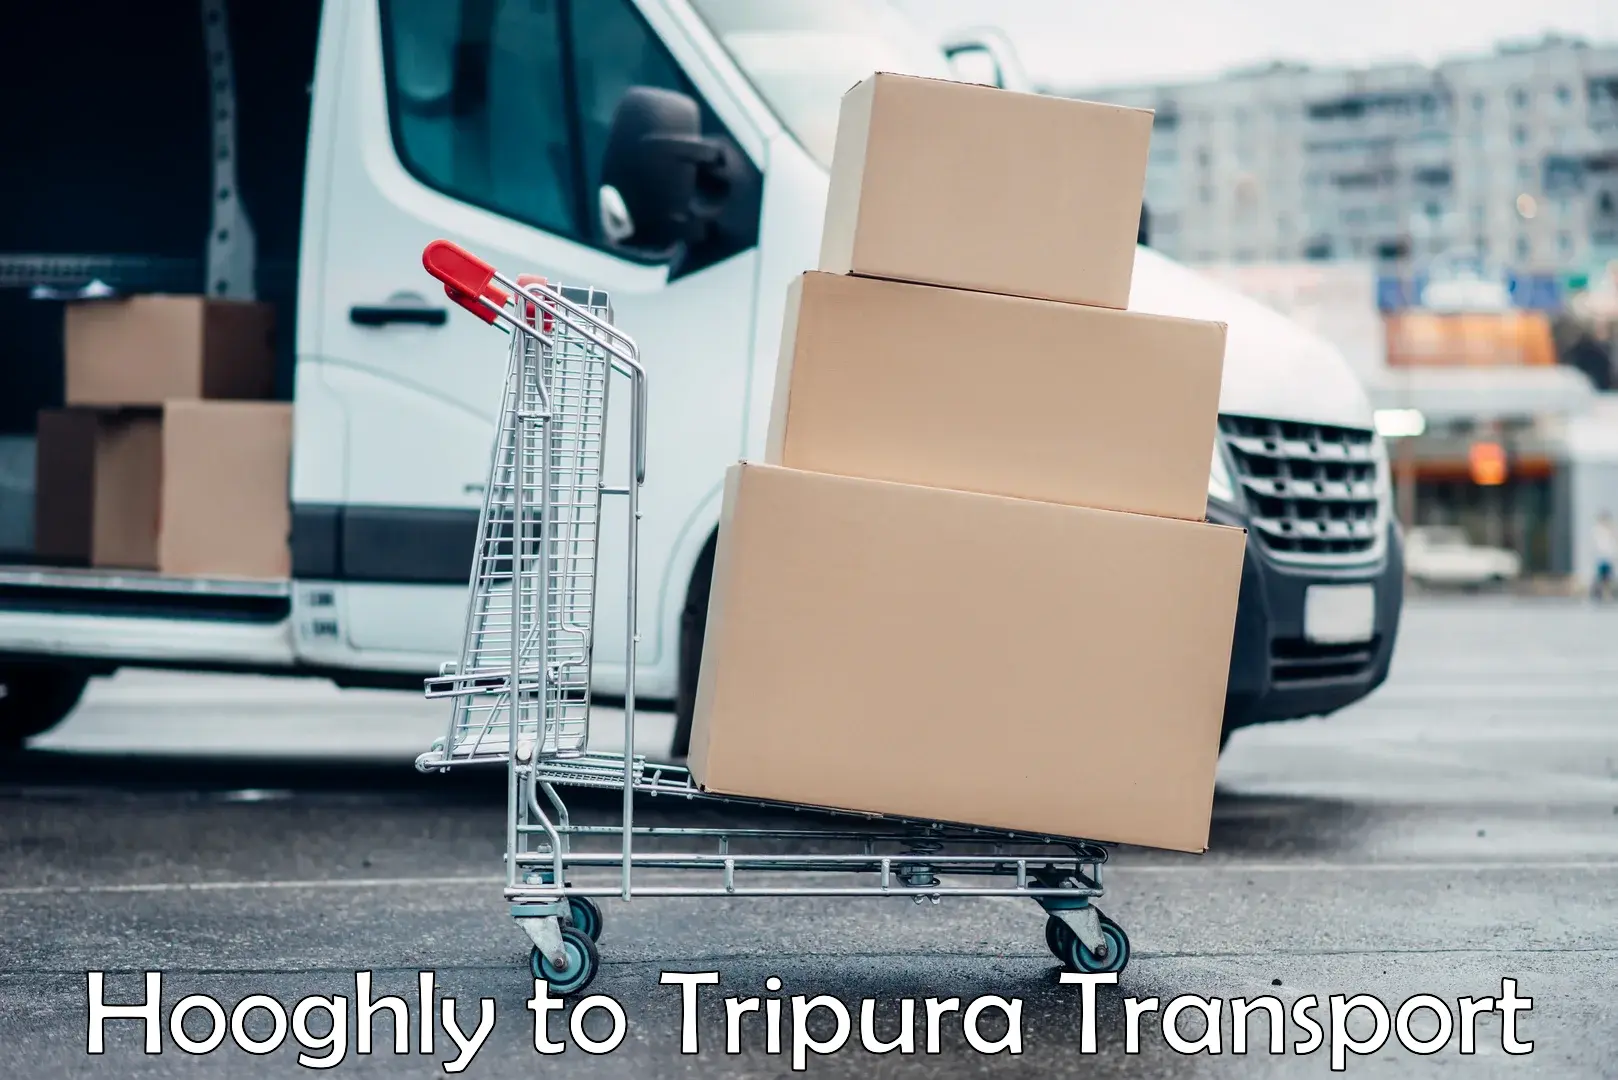 Road transport services Hooghly to South Tripura